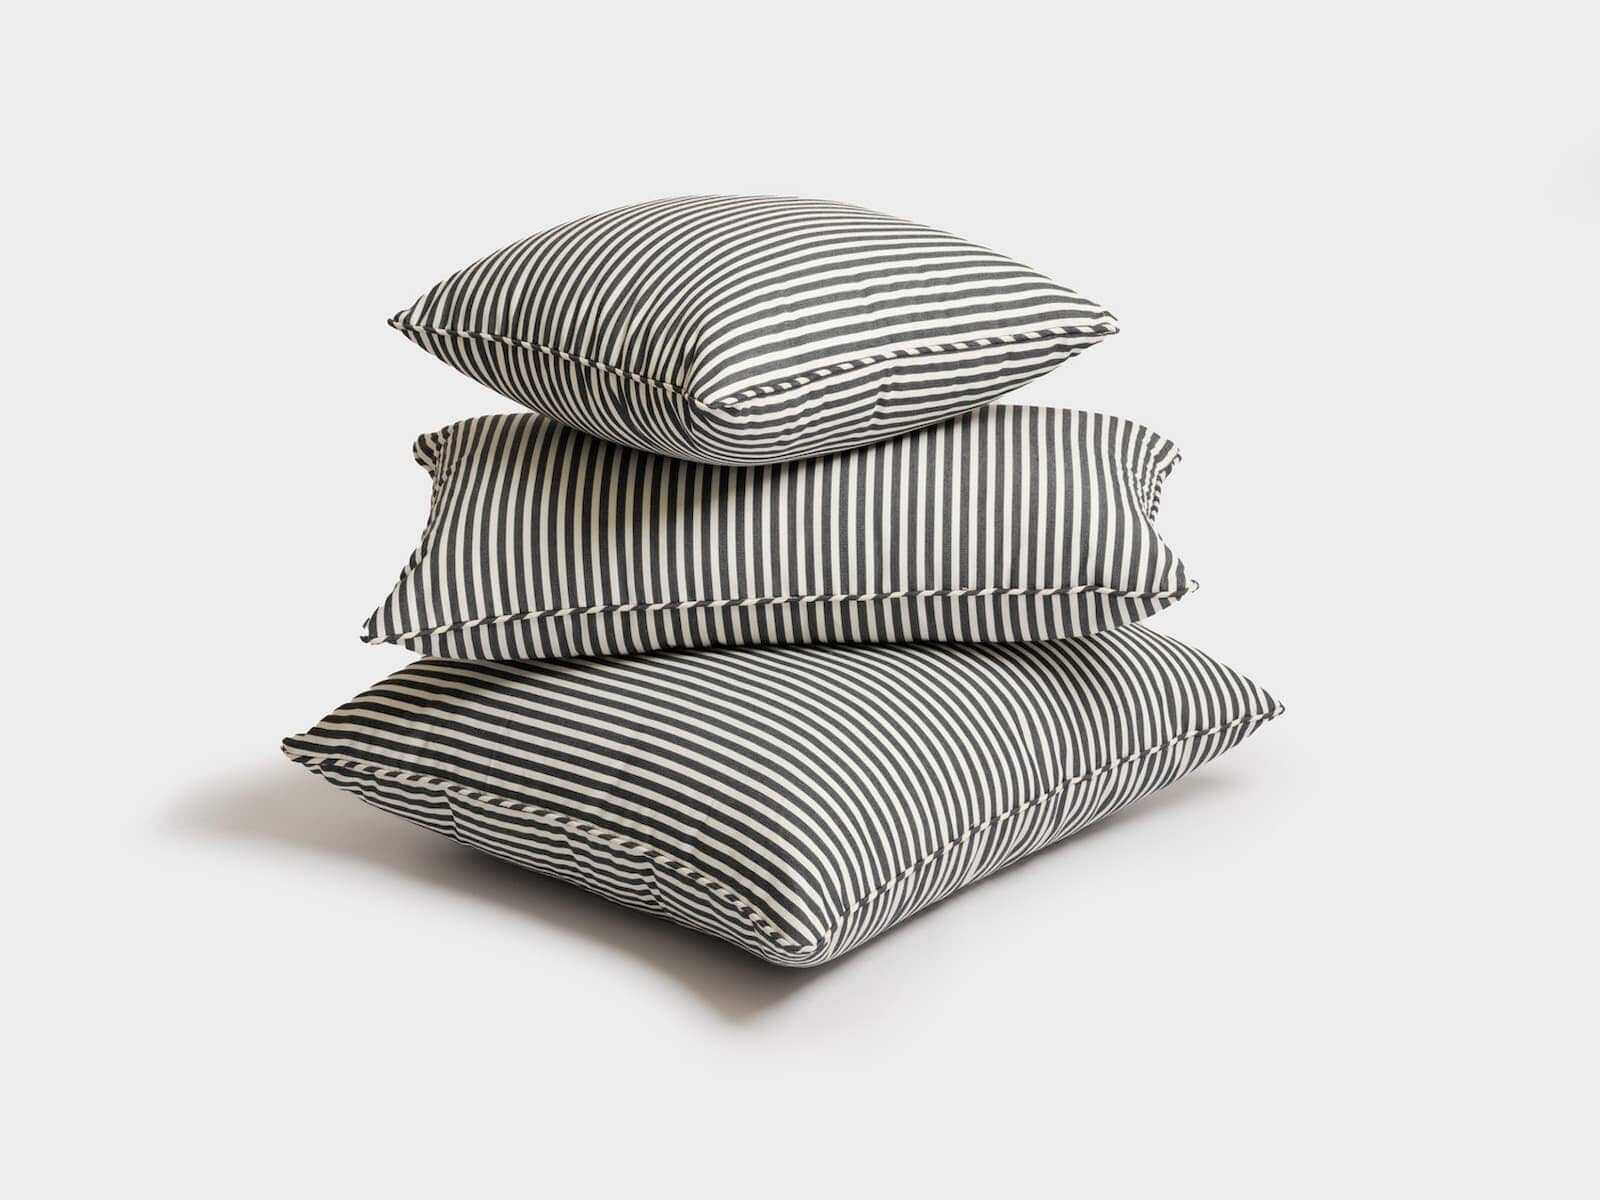 studio image of 2 outdoor cushions stacked